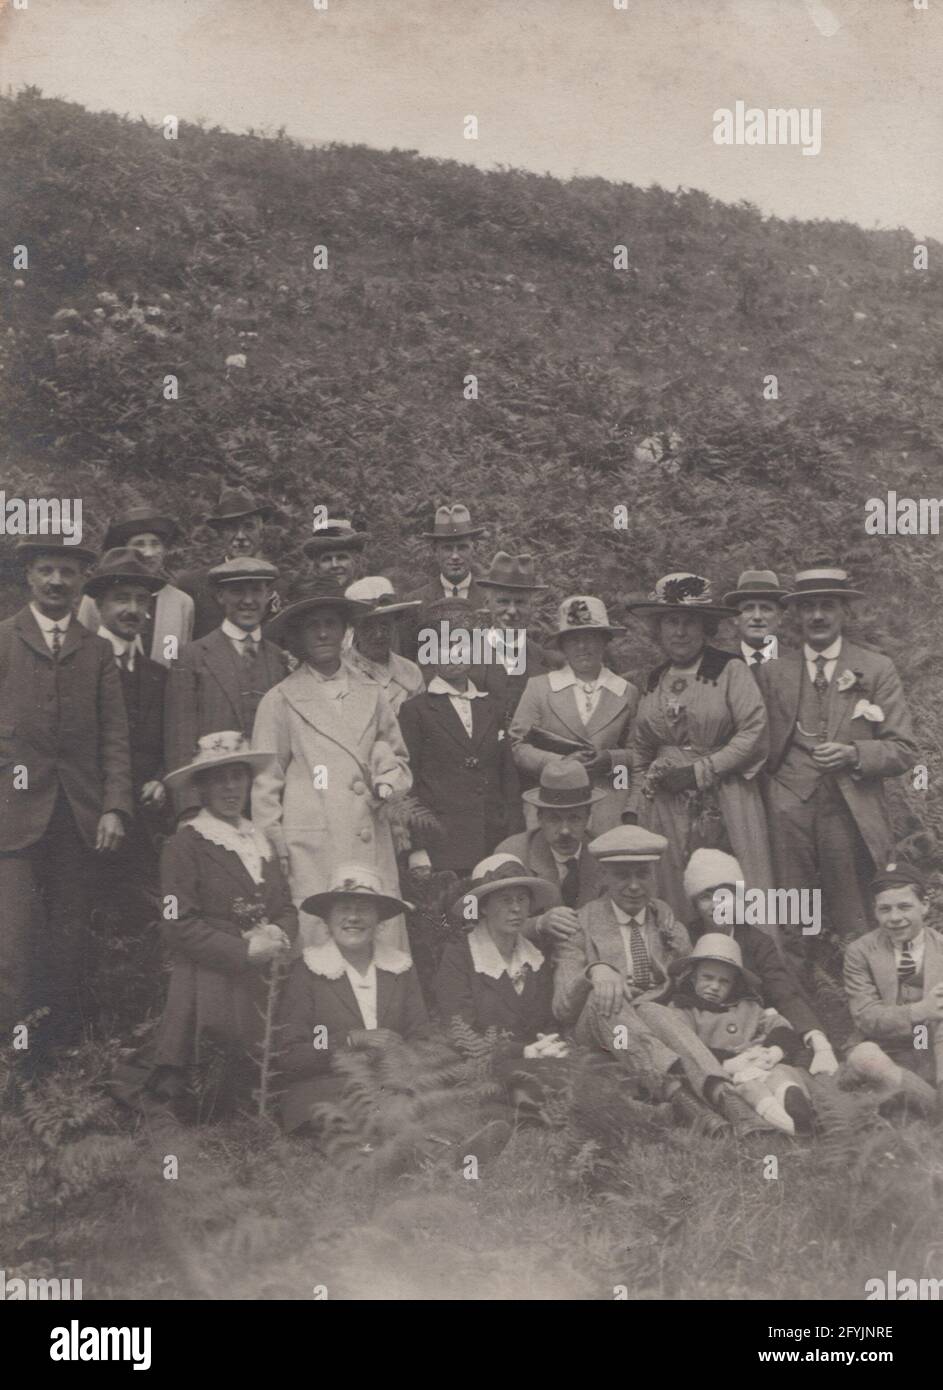 Vintage early 20th century photographic postcard showing a group of people on an outing to the coast or countryside. Stock Photo